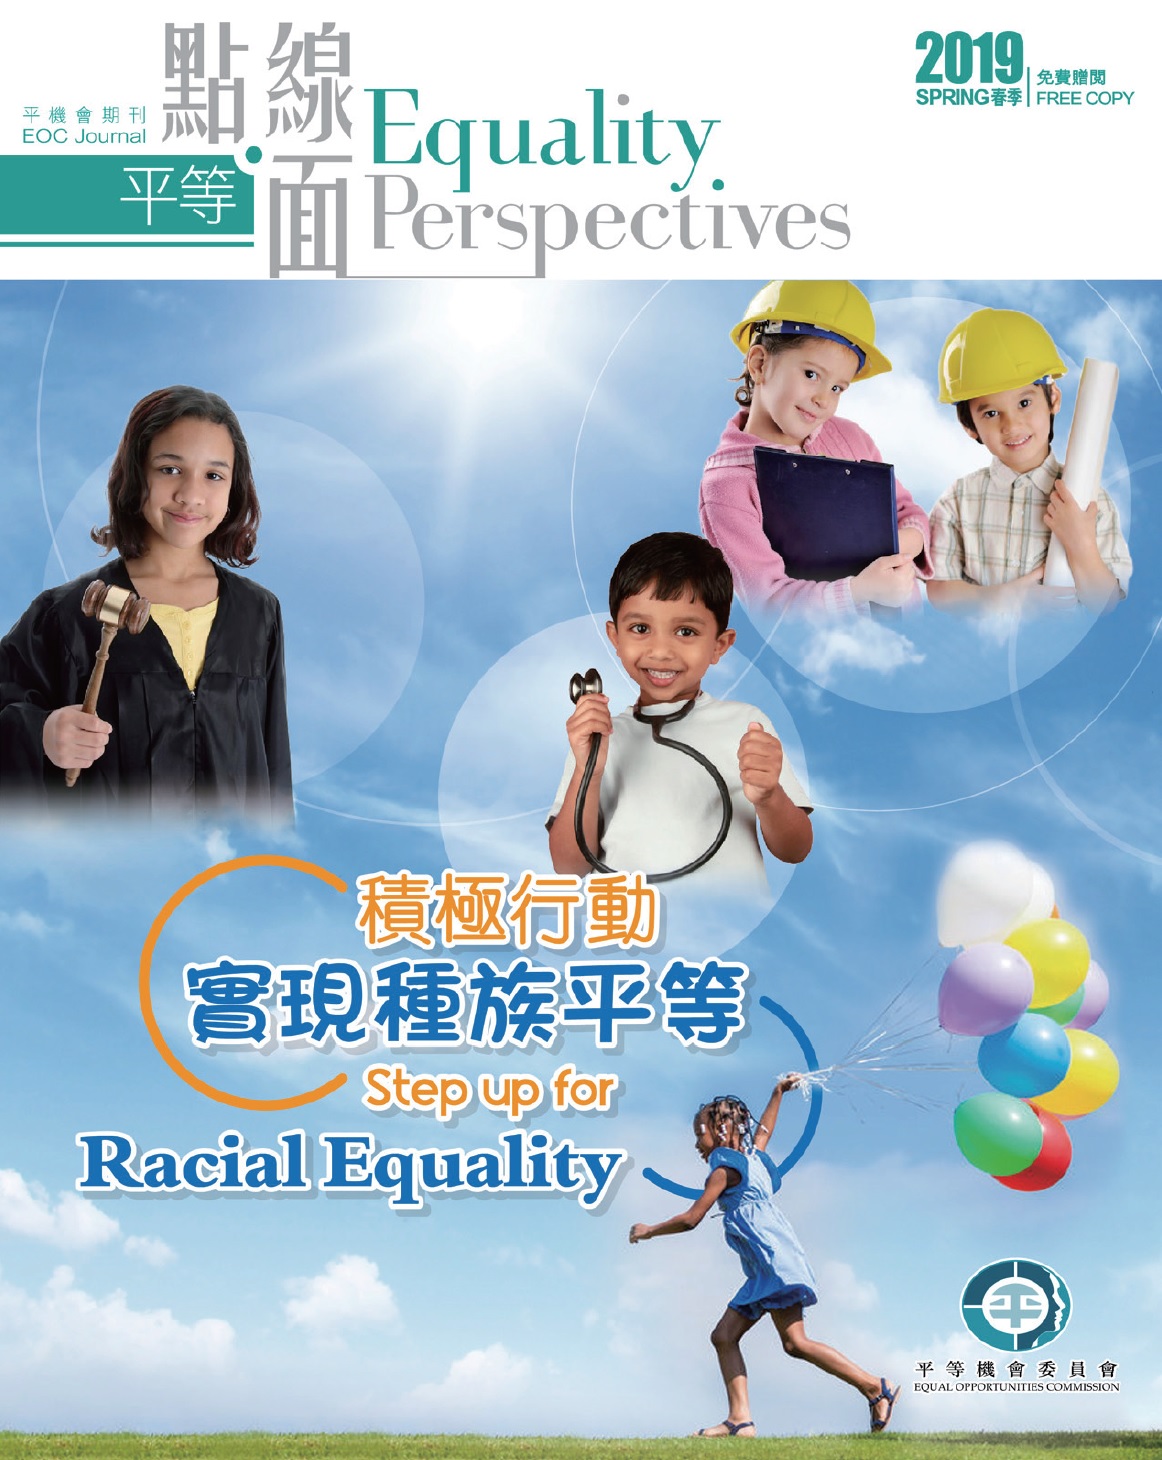 Cover of the Spring 2019 issue of Equality Perspectives, featuring a clear bluy sky and images of ethnic minority students wearing, respectively, a lawyer